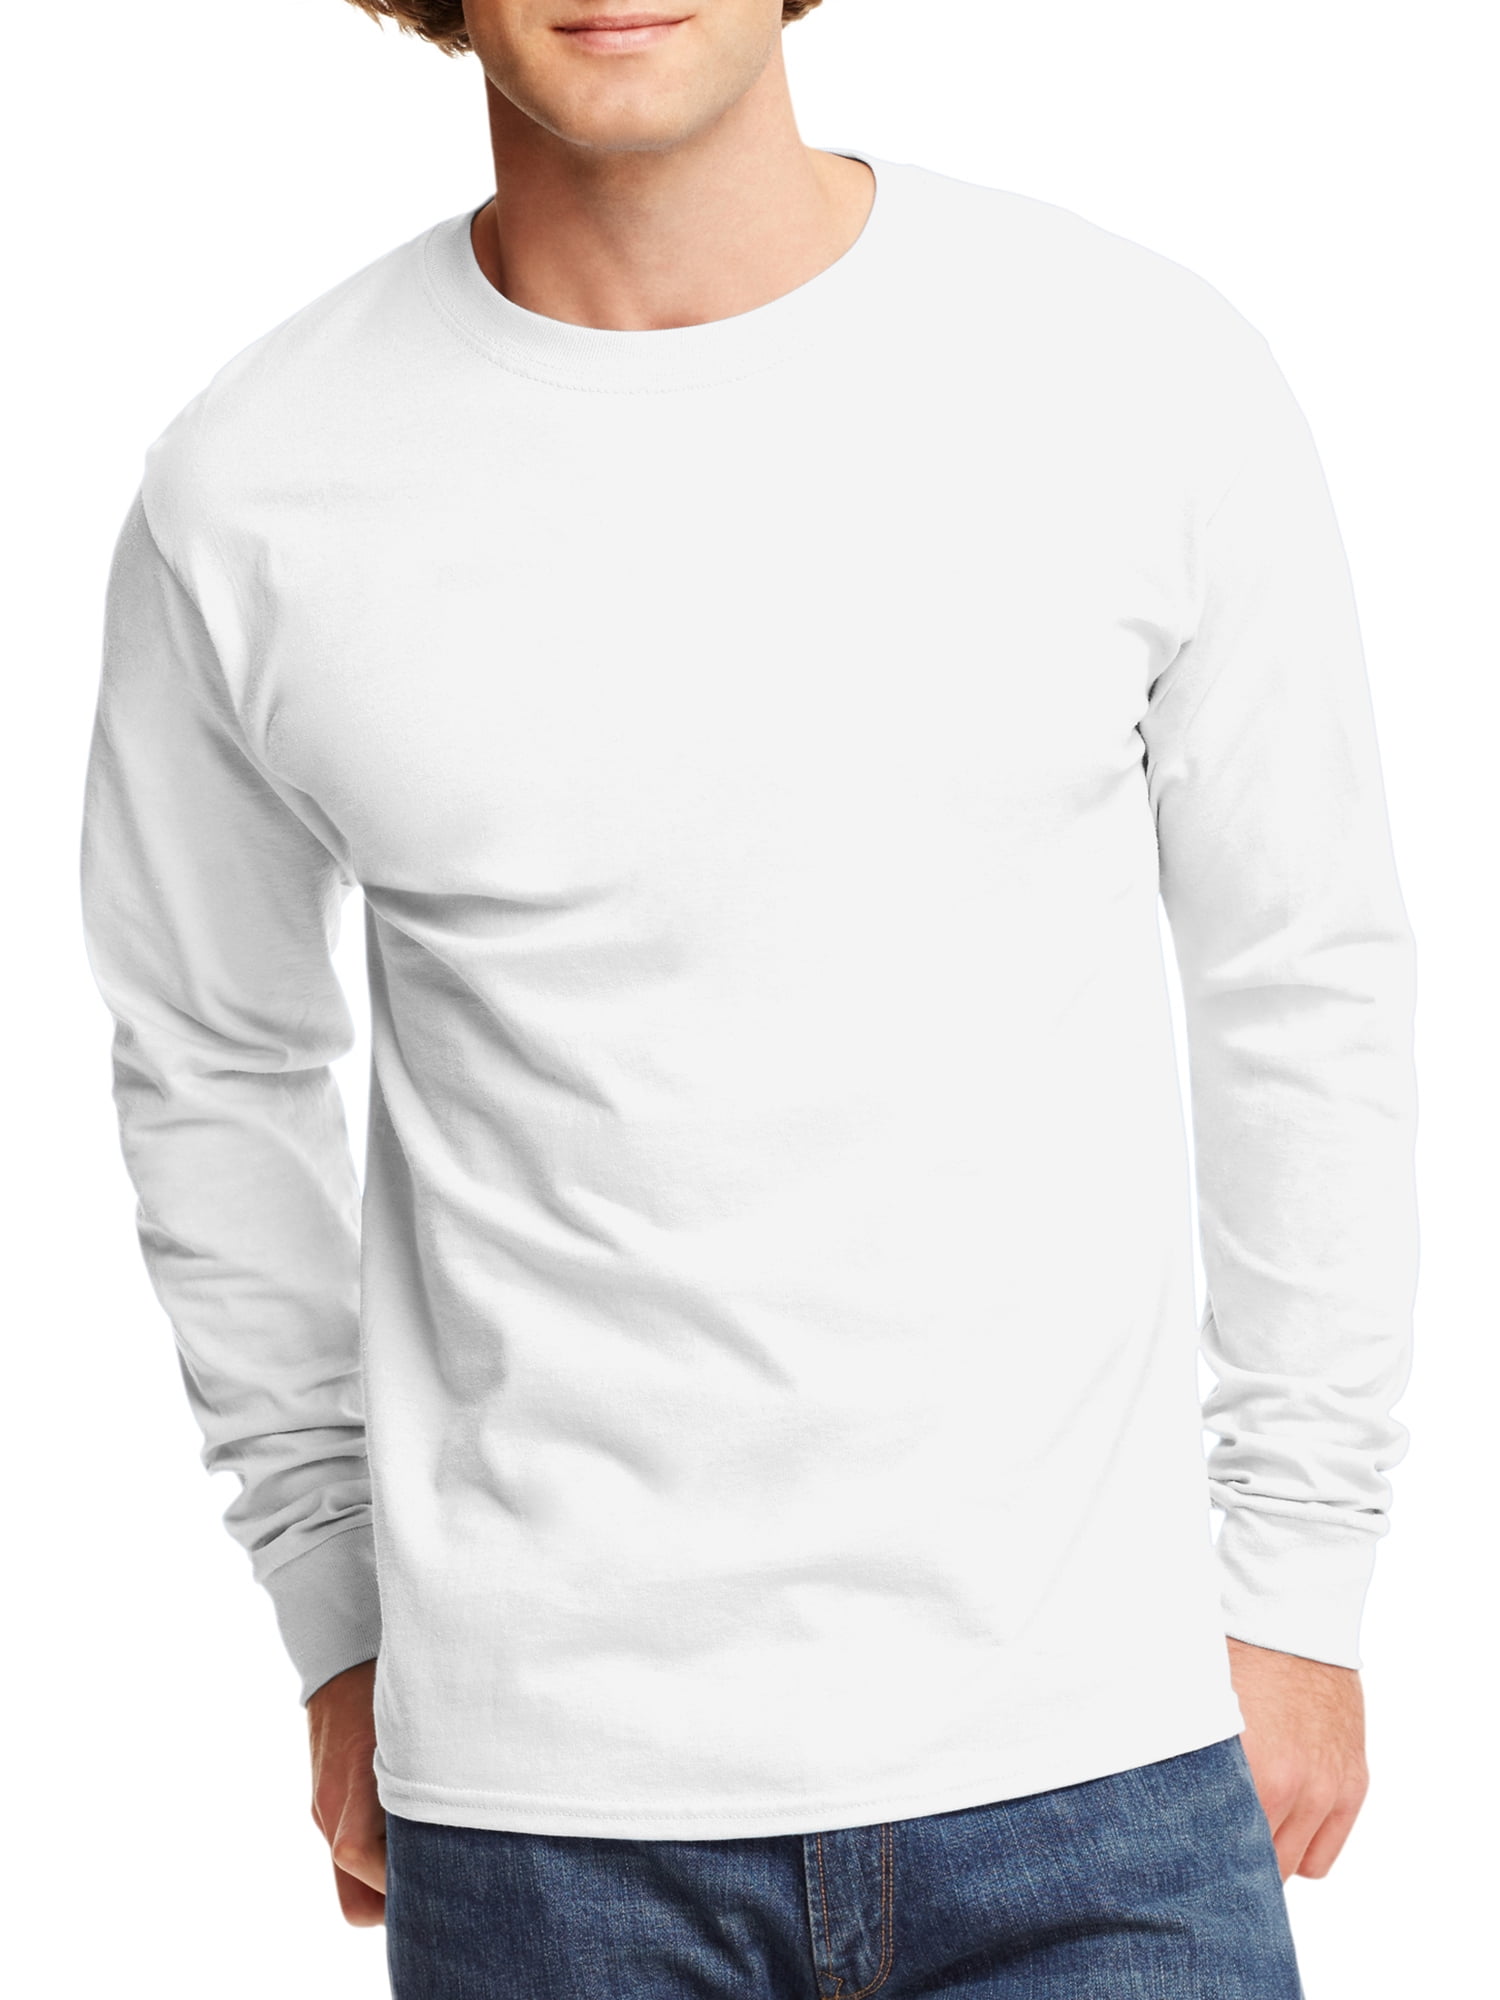 Hanes - Hanes Men's and Big Men's Authentic Long Sleeve Tee, Up To Size ...